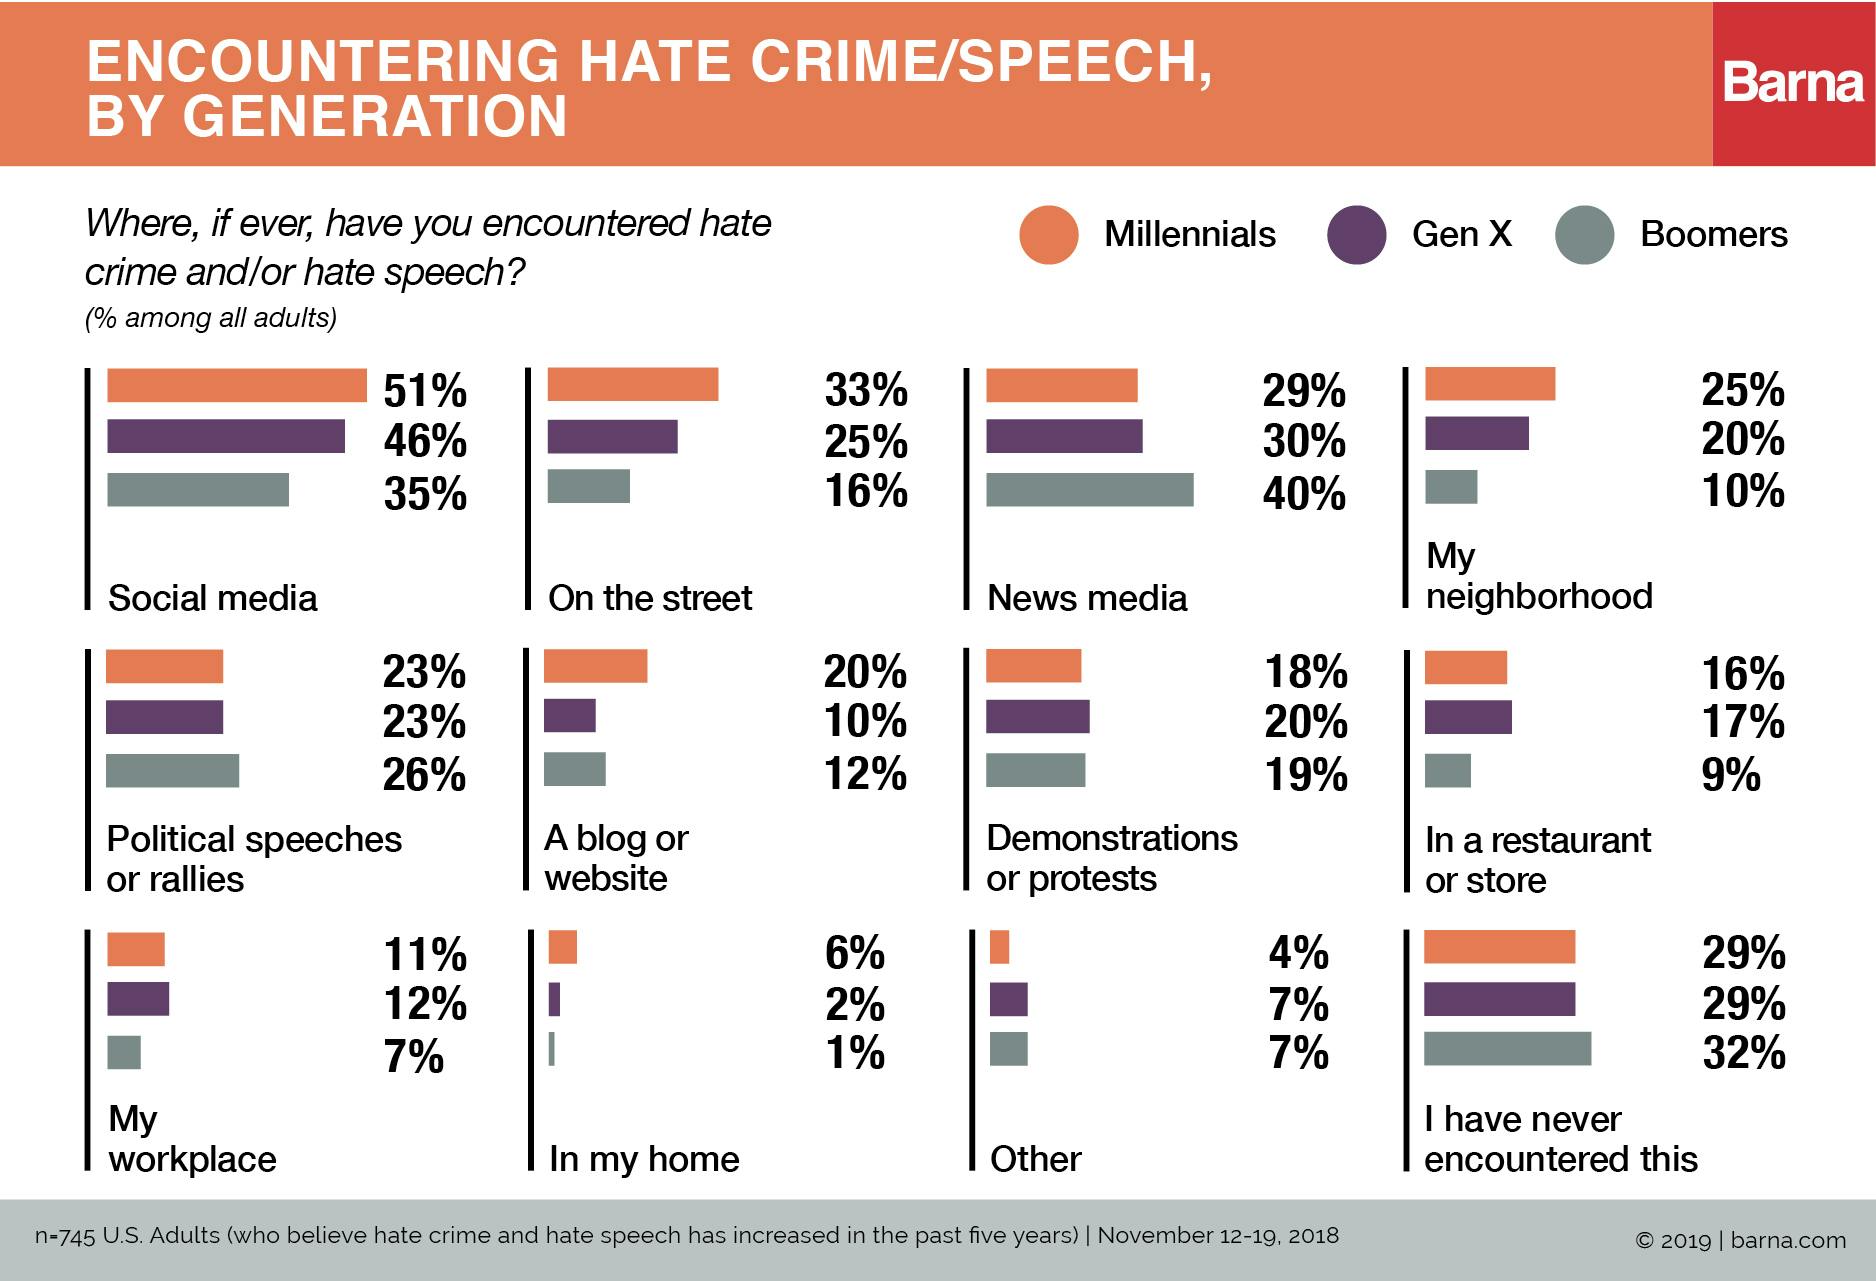 U.S. Adults Believe Hate Speech Has Increased—Mainly Online